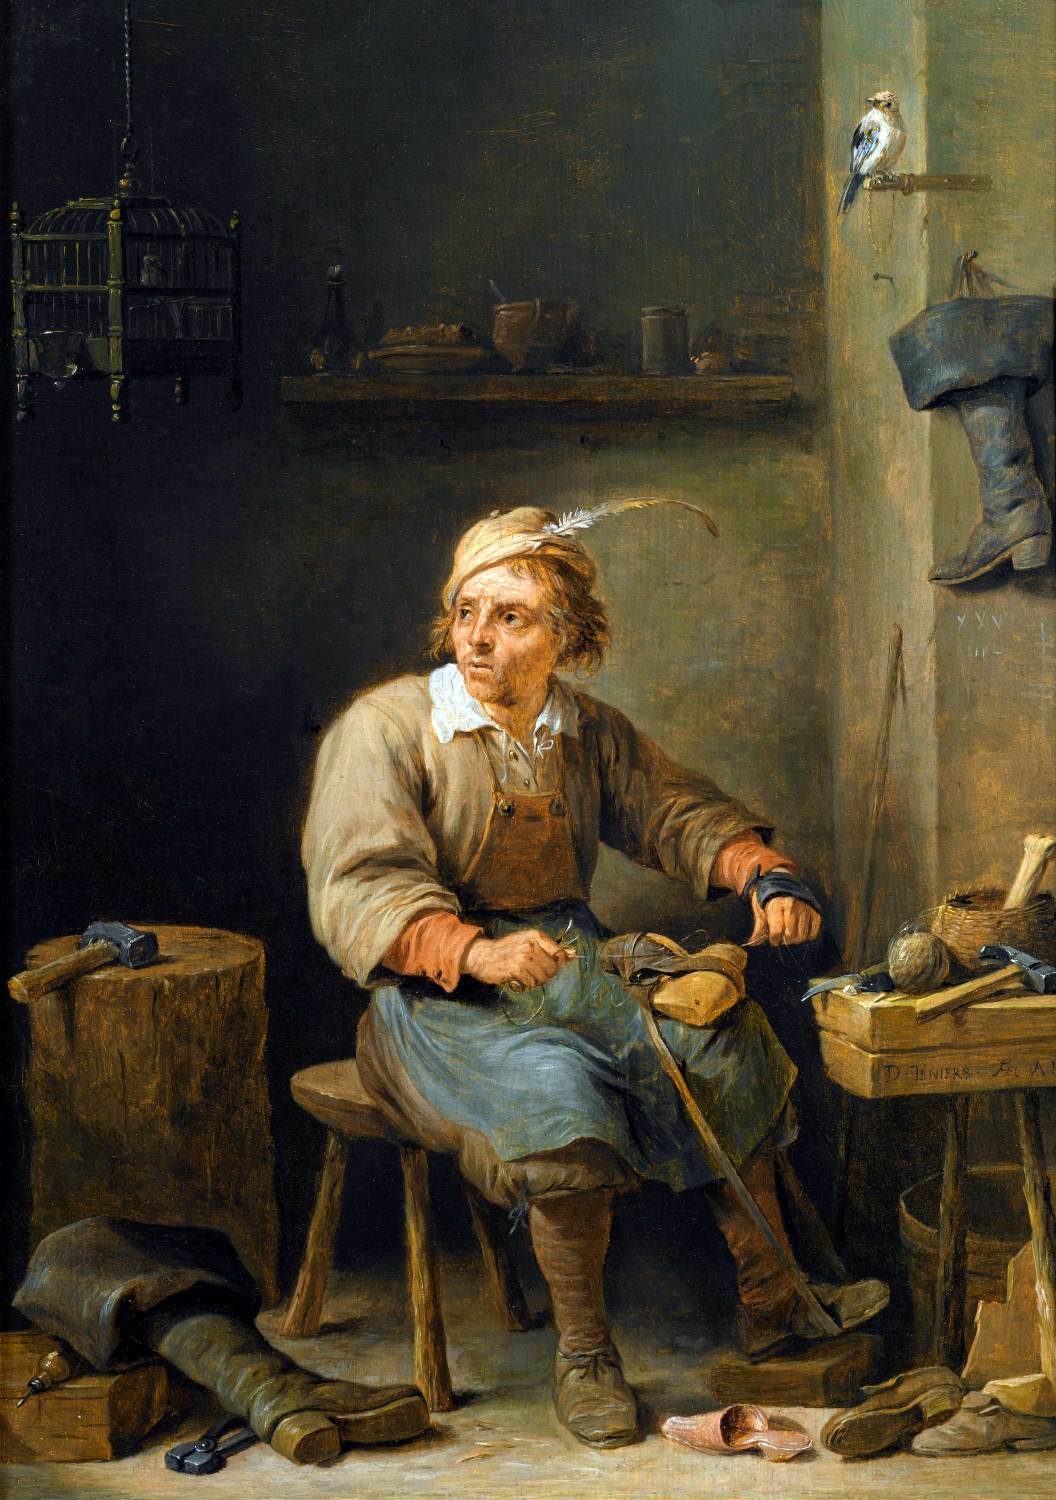 A shoemaker in his workshop